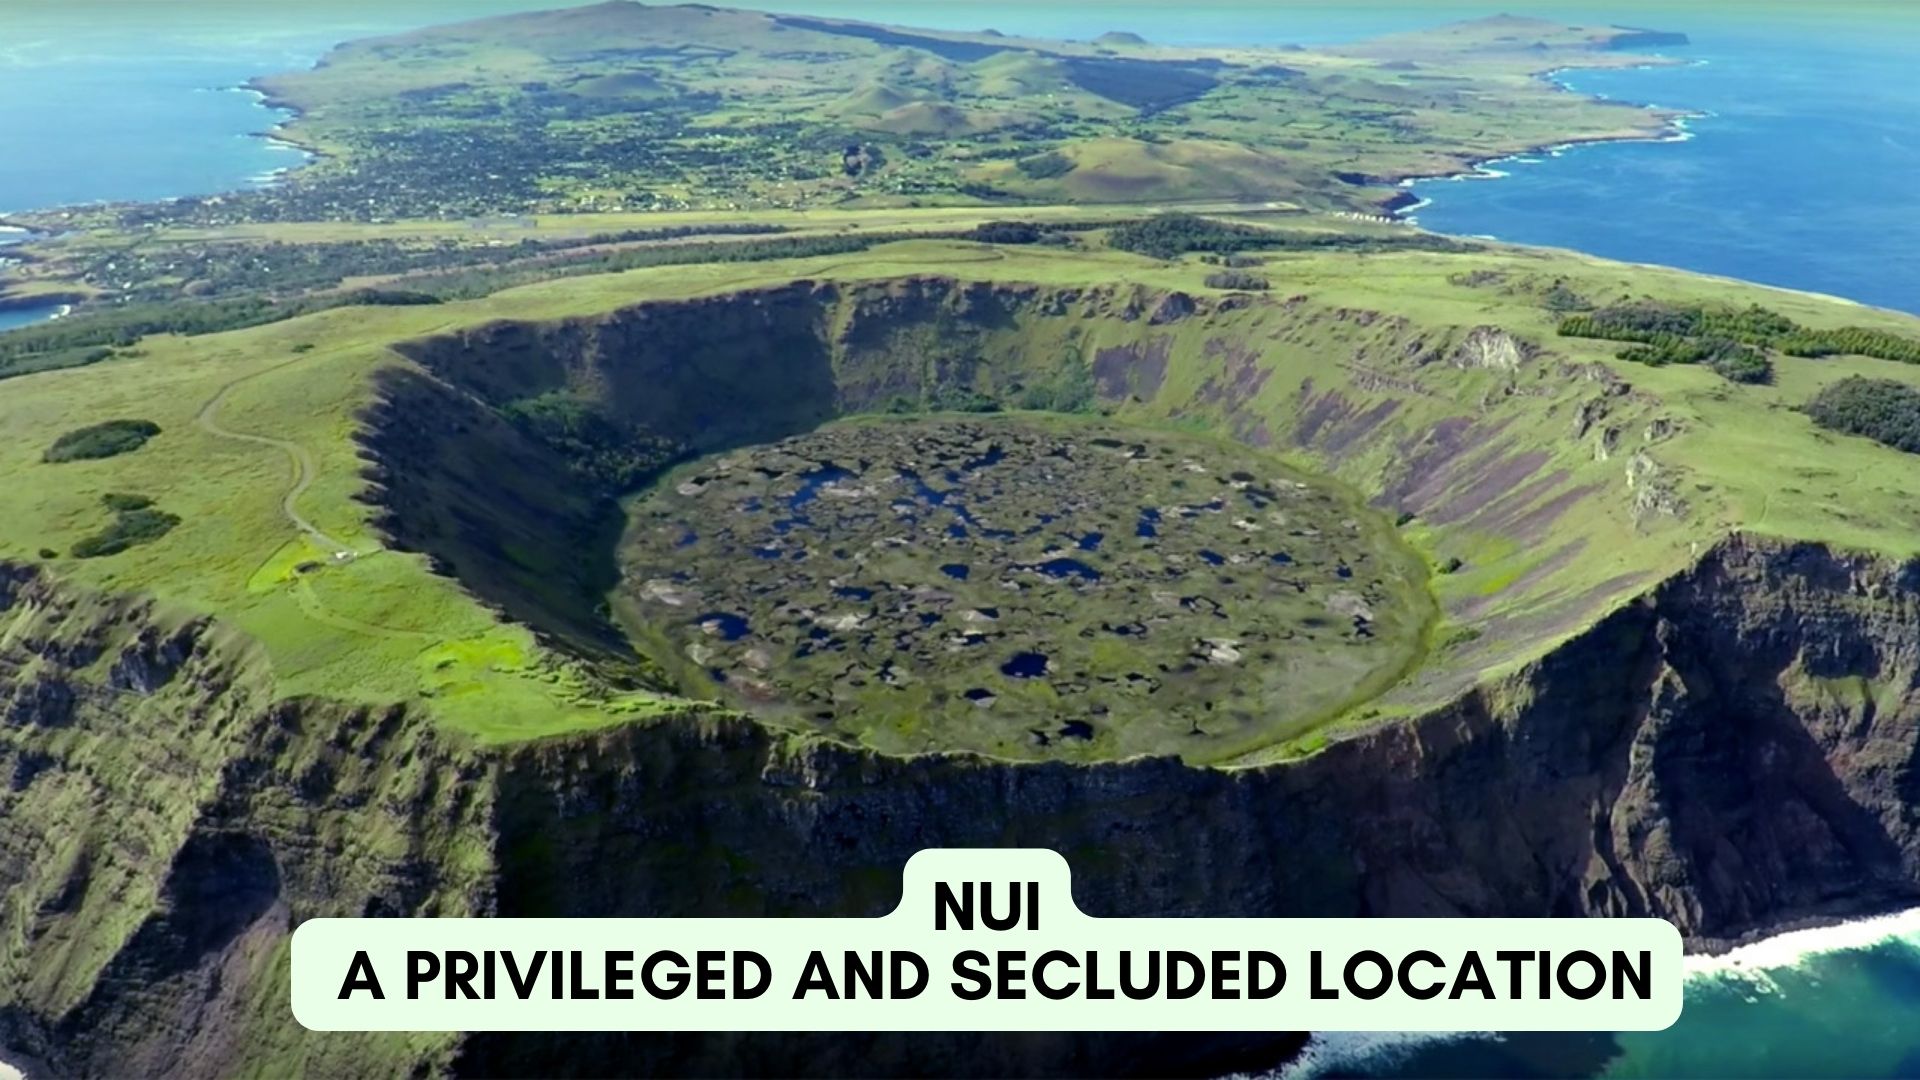 Nui - A Privileged And Secluded Location